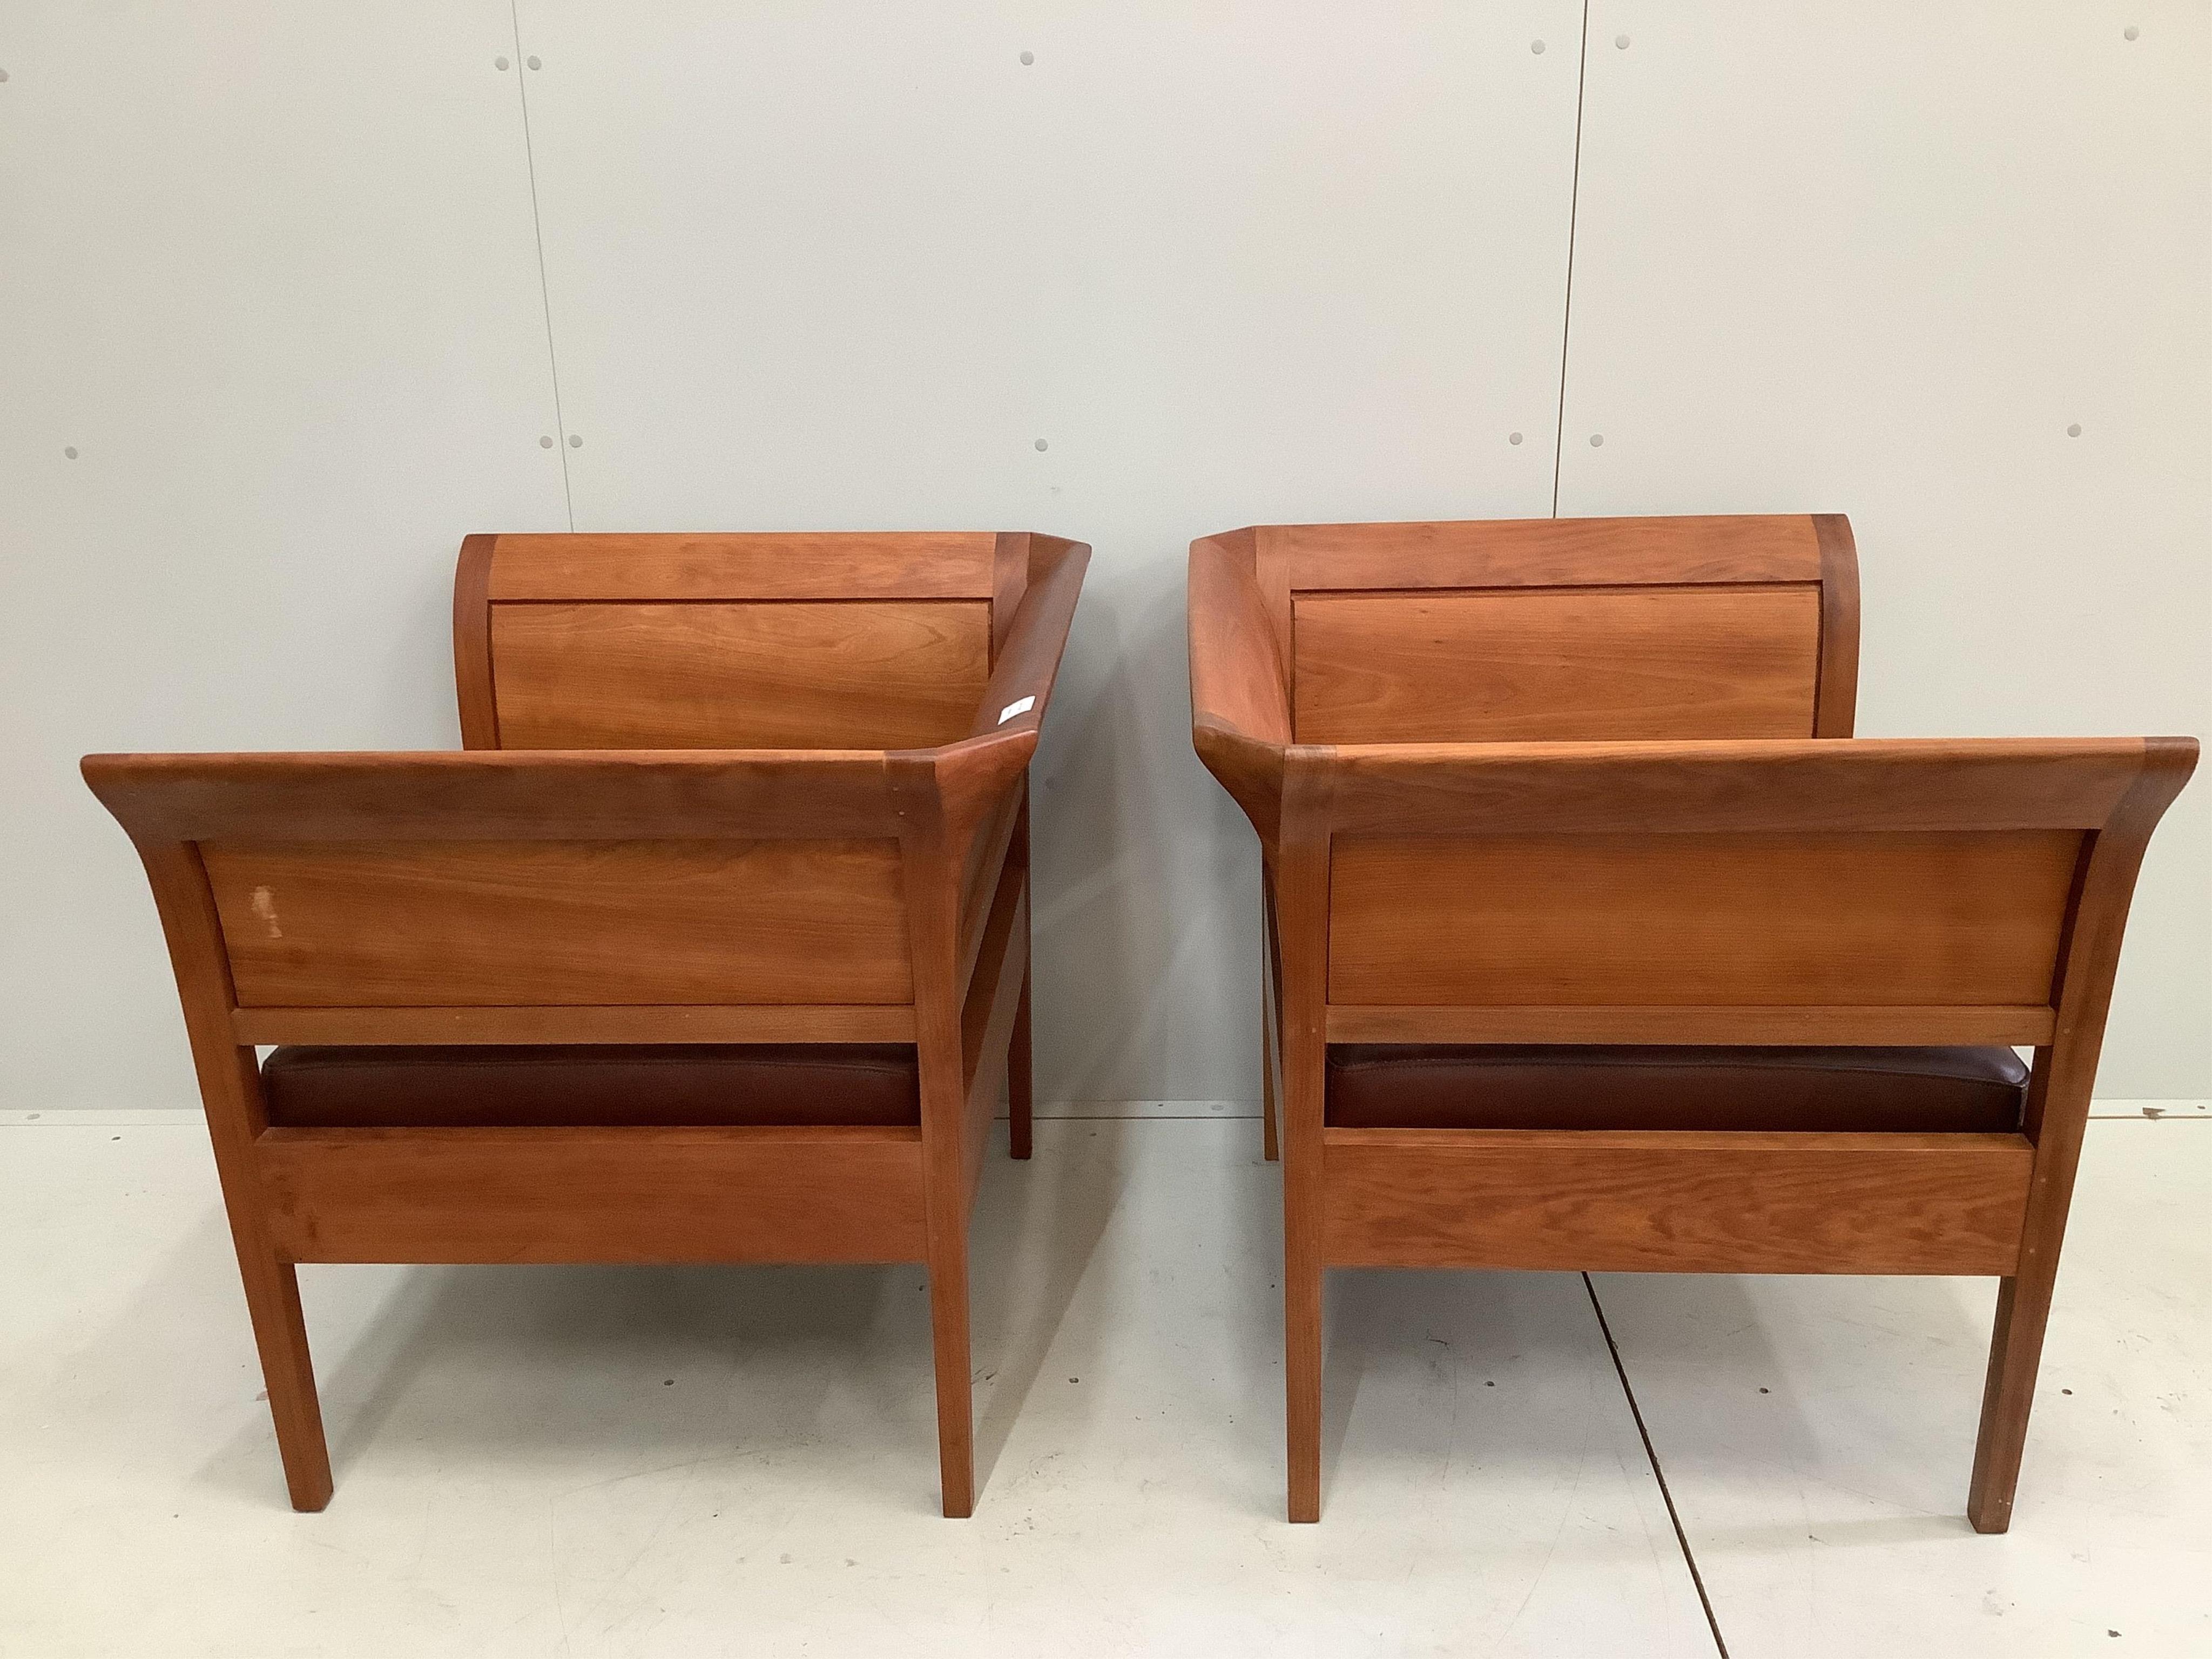 A pair of Thomas Moser cherrywood ‘Sofia Lounge chairs’, leather seats, width 89cm, depth 77cm, height 80cm. Condition - good